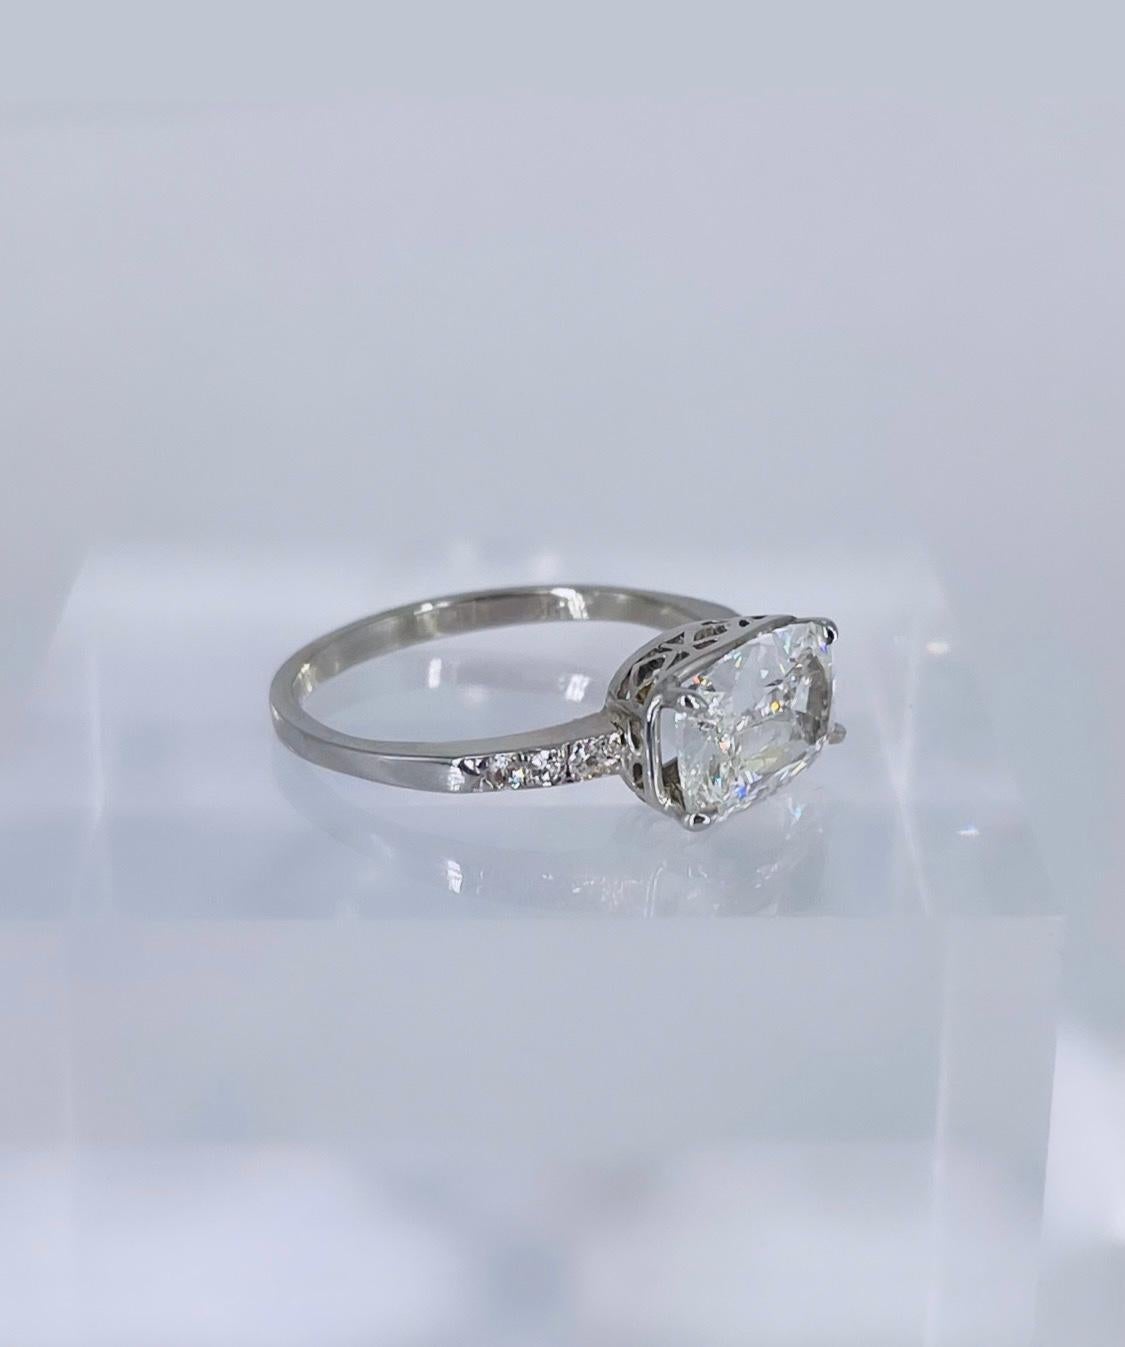 This sleek and elegant Art Deco ring is perfect for someone looking for a unique piece. This ring features an exceptionally elongated 1.71 carat cushion cut diamond with linear faceting that gives it a subtle mirror-like shine, which is truly